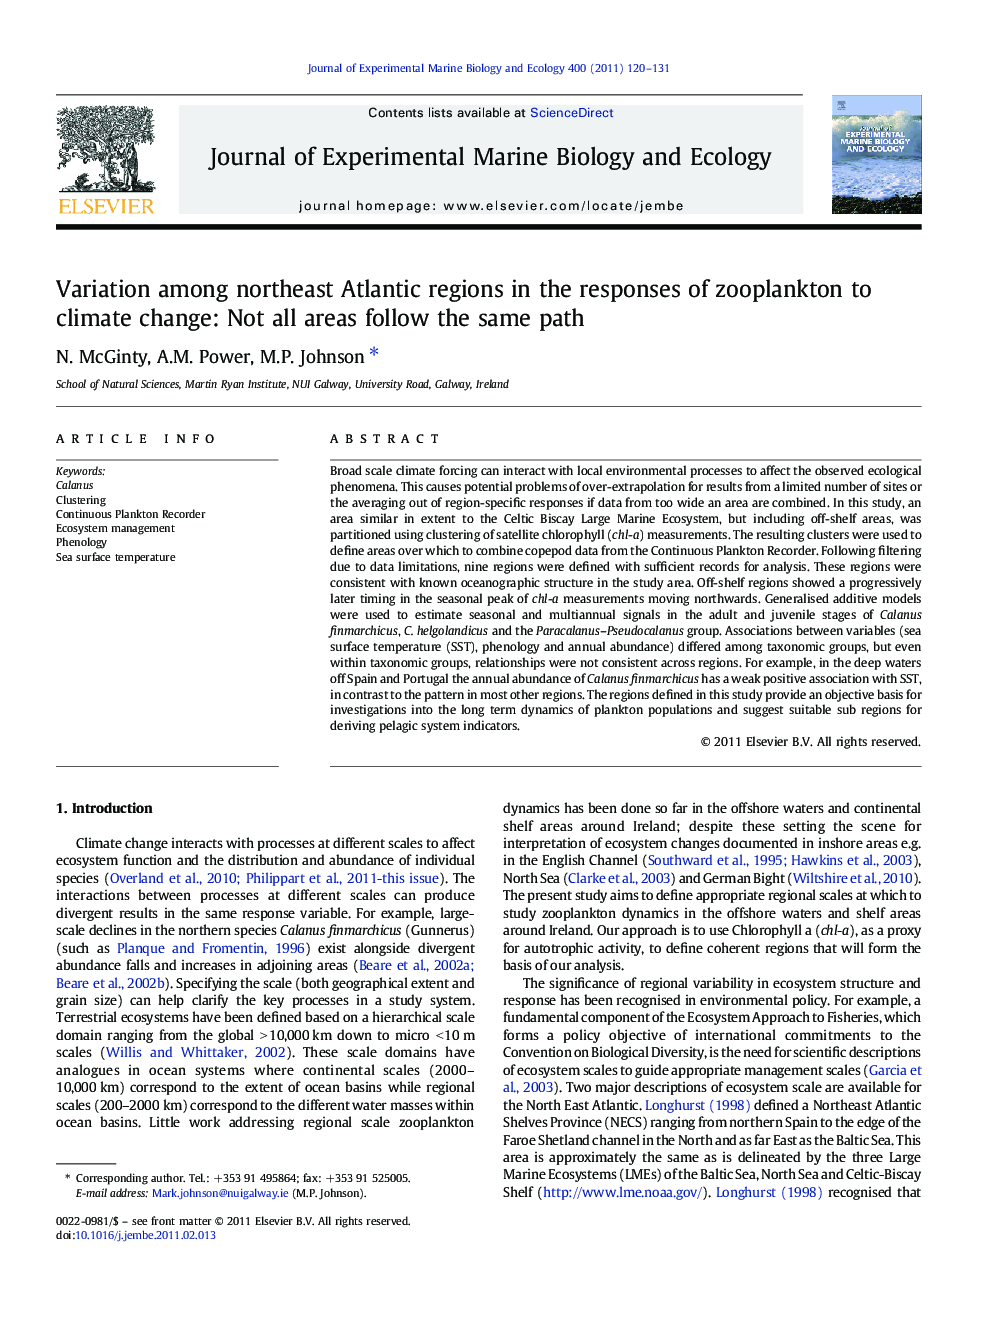 Variation among northeast Atlantic regions in the responses of zooplankton to climate change: Not all areas follow the same path